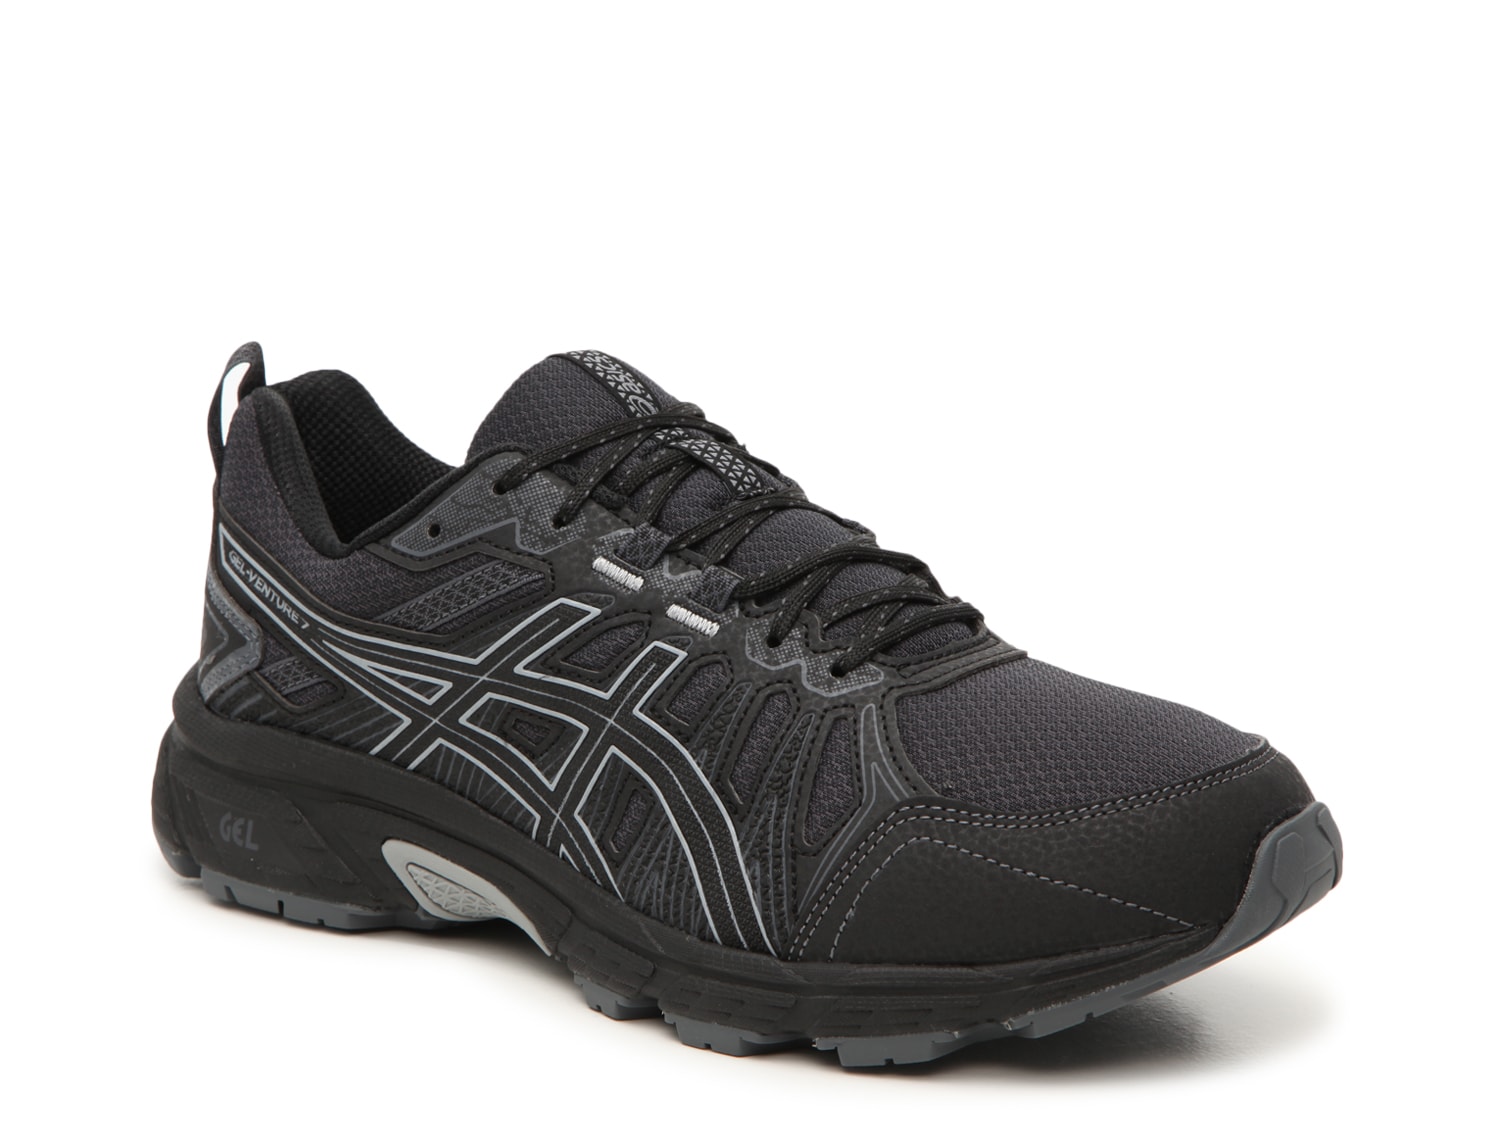 asics leather work shoes